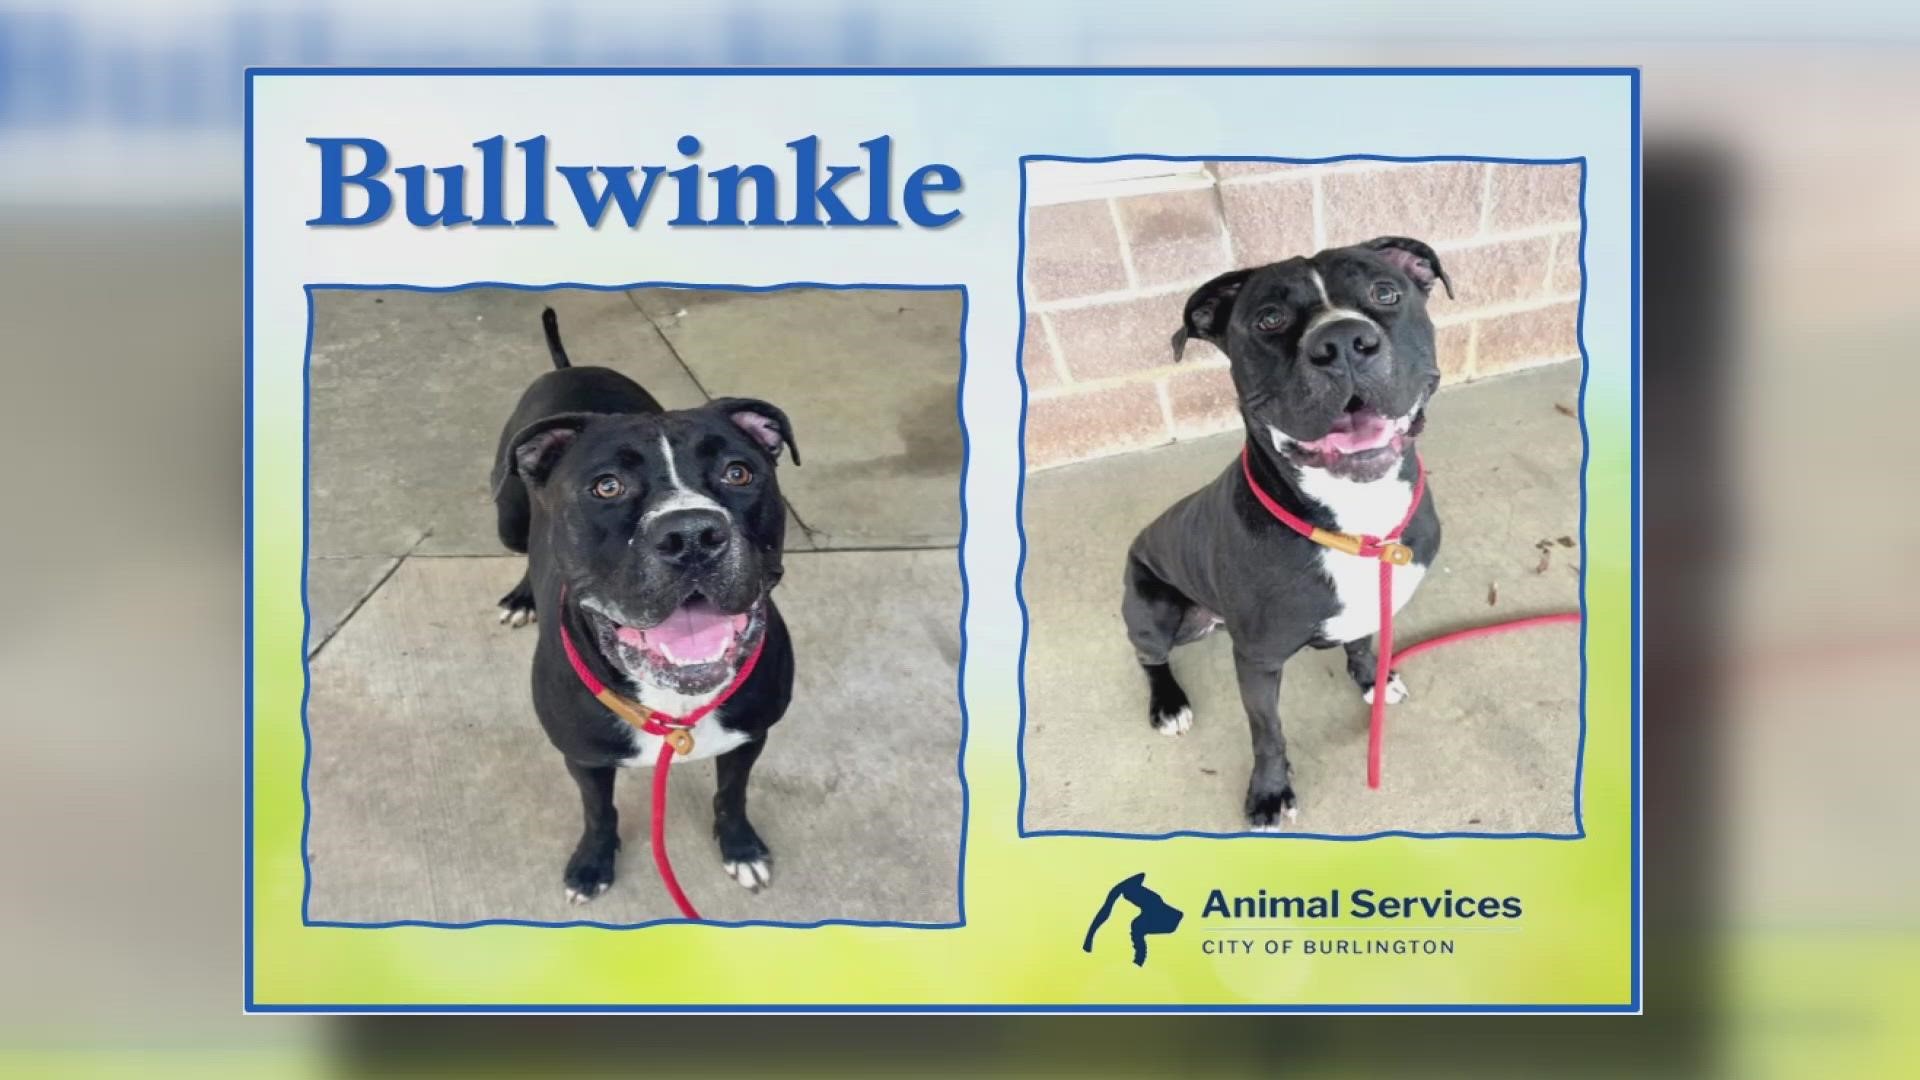 Let's get Bullwinkle adopted!